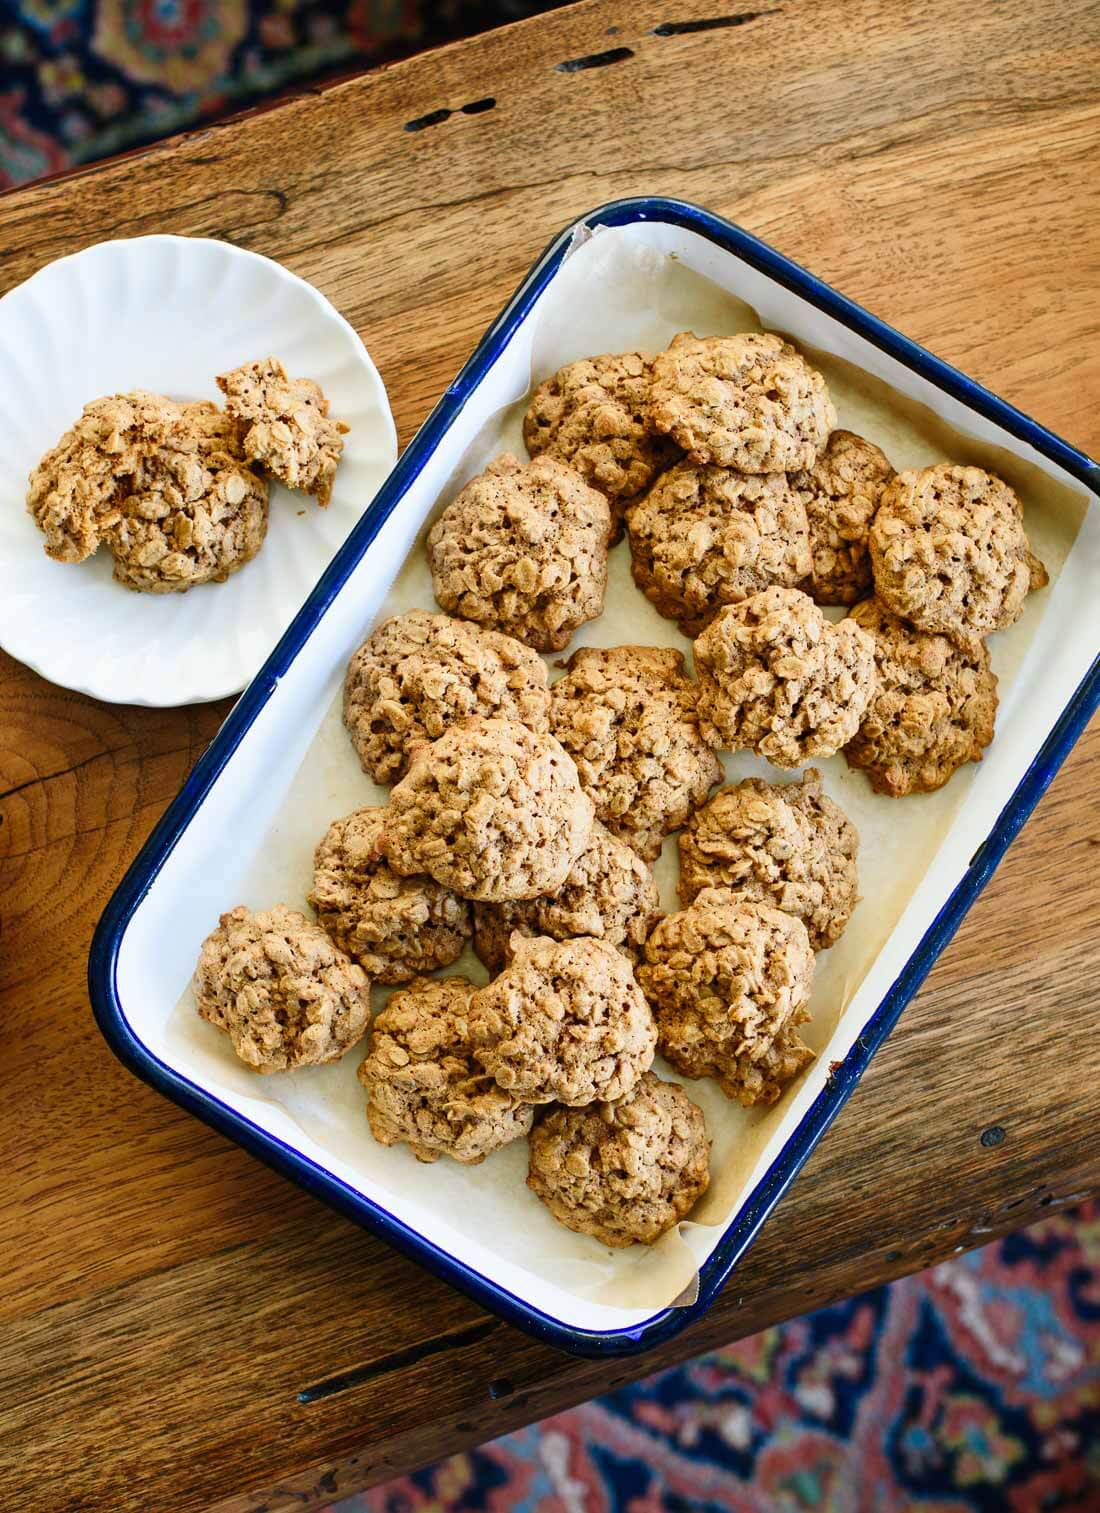 These oatmeal cookies are truly the best. They’re soft and fluffy in the middle, with crisper edges and lovely flavor, thanks to warming spices and oat flour. 